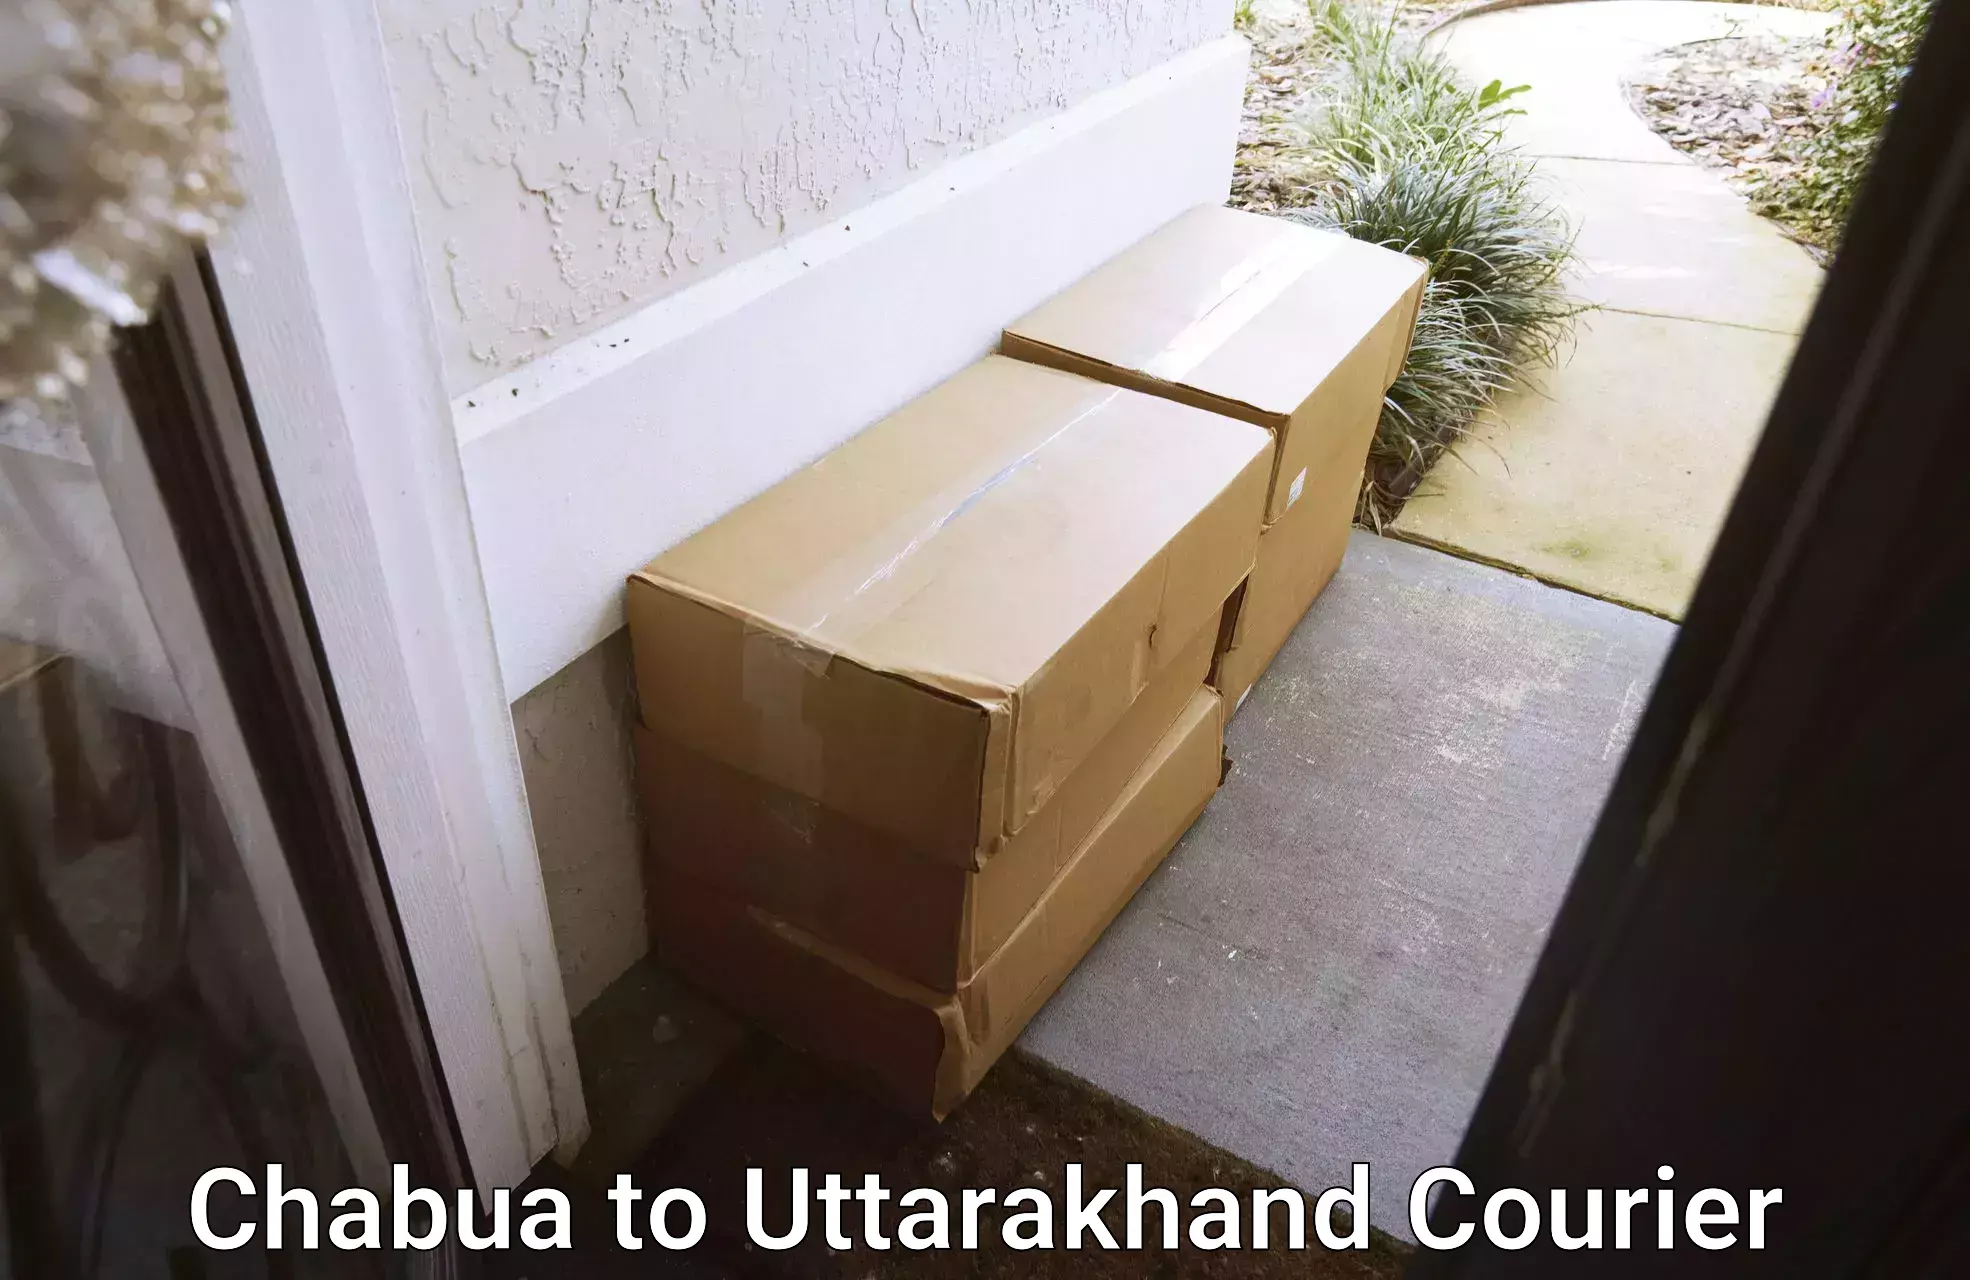 24-hour courier services in Chabua to Uttarakhand